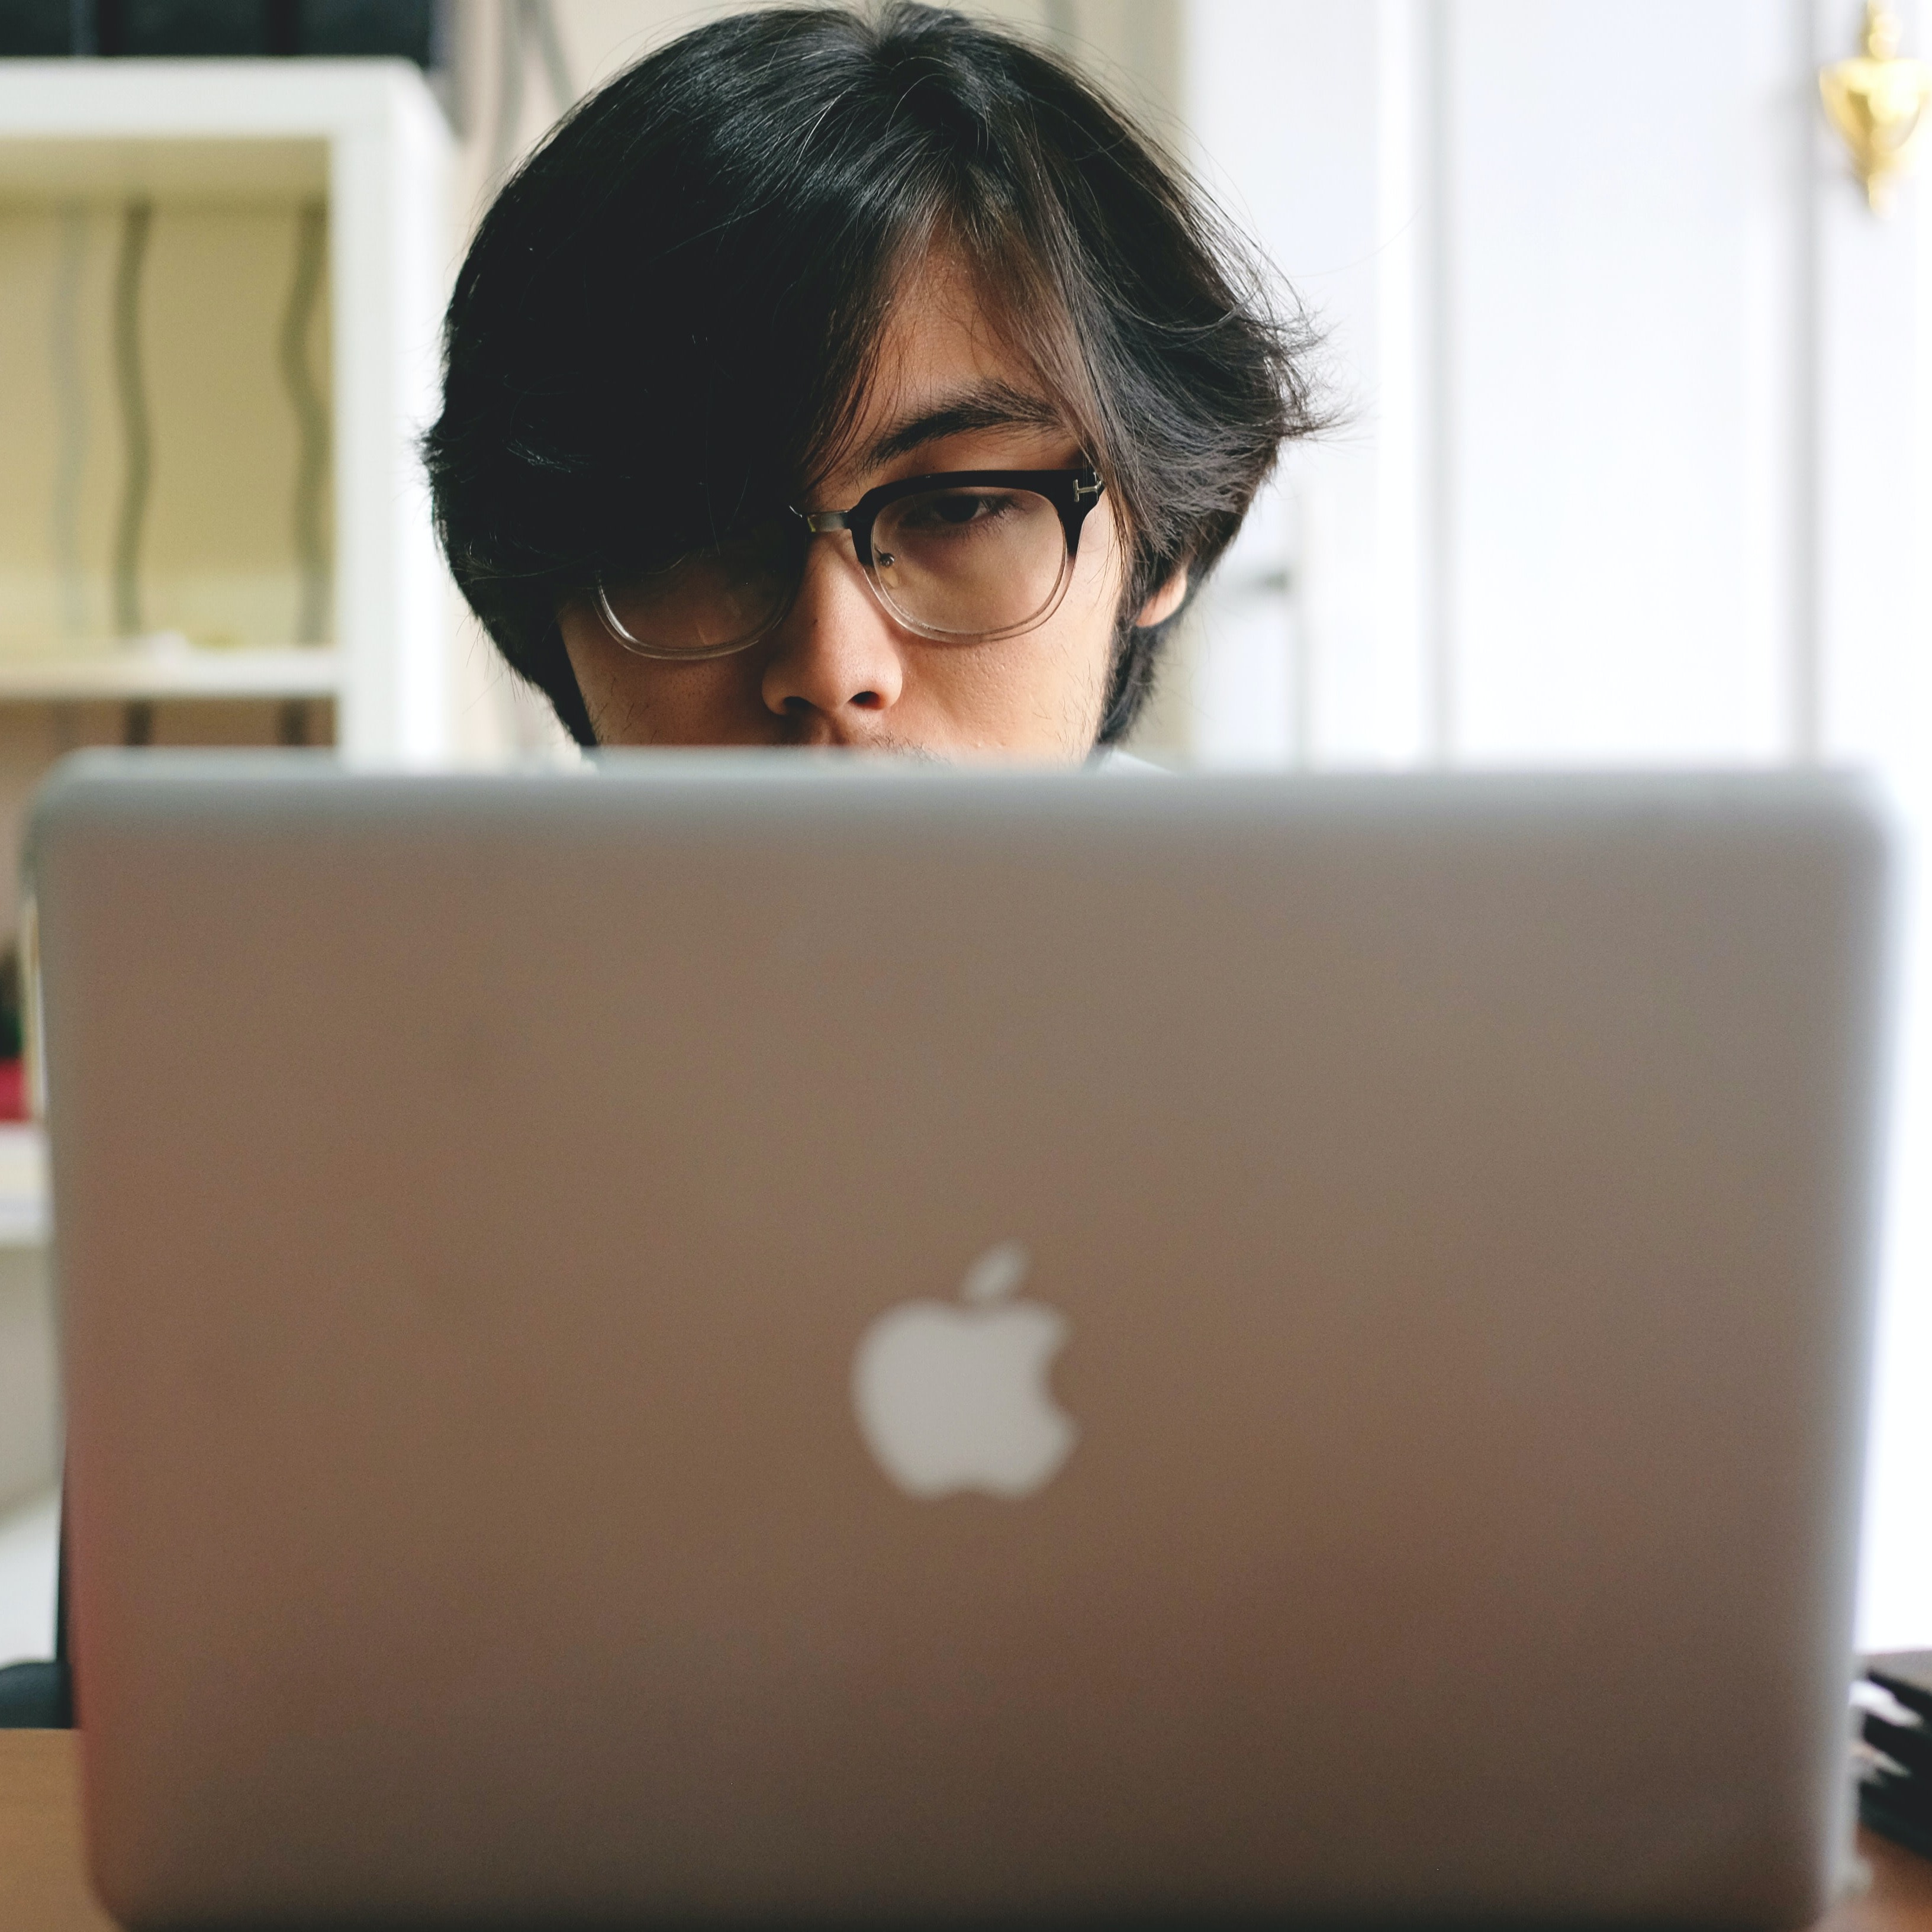 Black haired man with glasses sitting behind Apple Macbook laptop